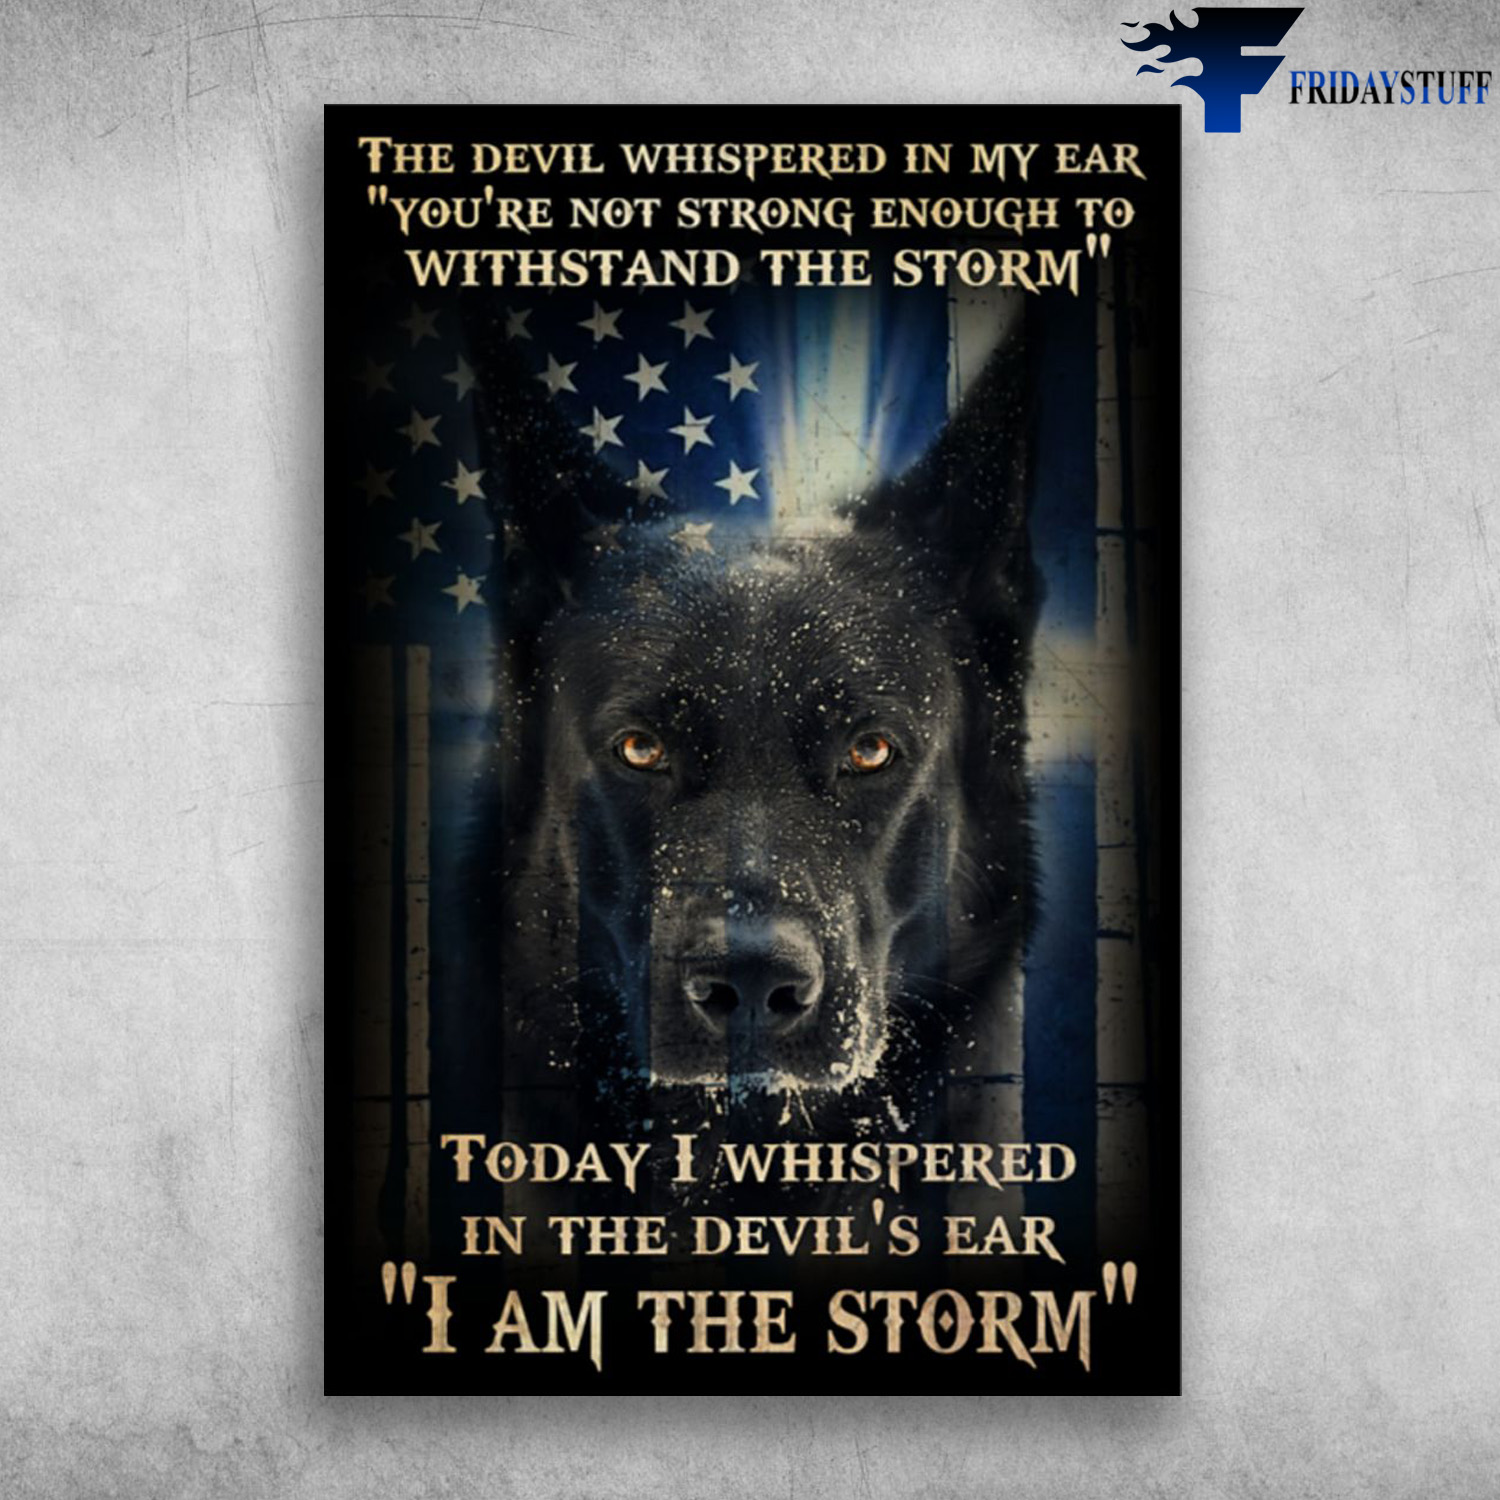 Black Dog - The Devil Whispered, In My Ear, You Not Strong, Enough To Withstand The Storm, To Day, I Whispered In The Devil's Ear, I Am The Storm